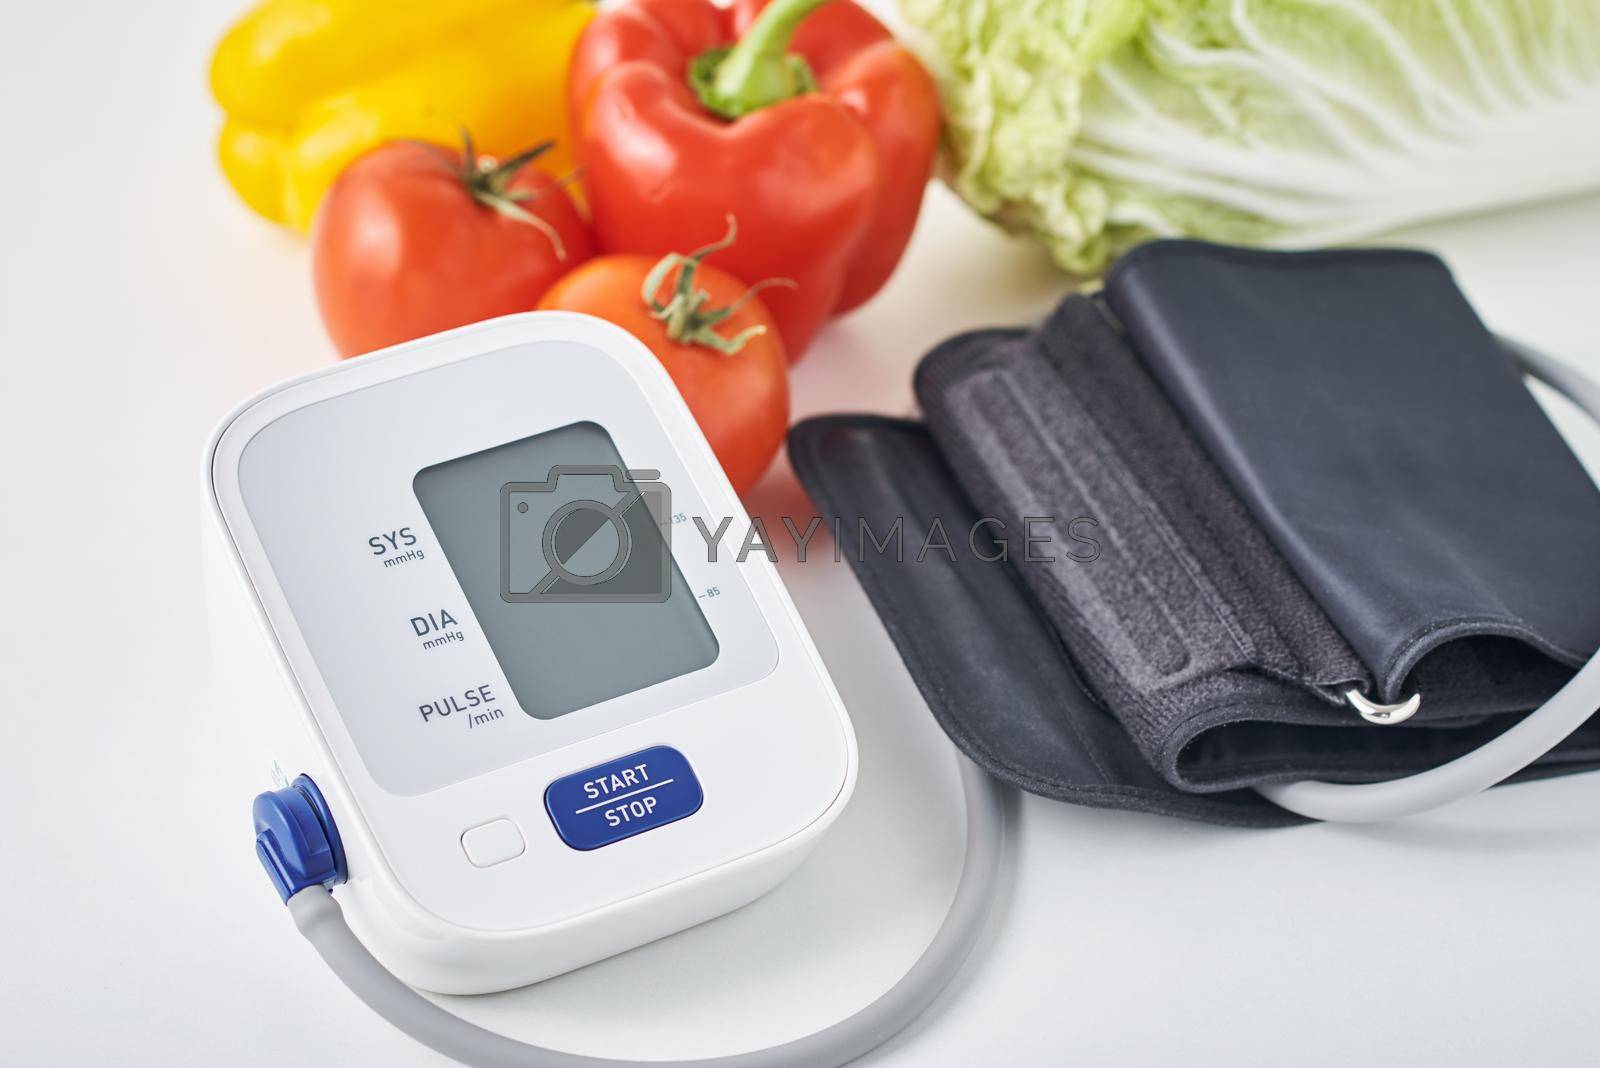 Digital blood pressure monitor and fresh vegetables on table. Healthcare concept